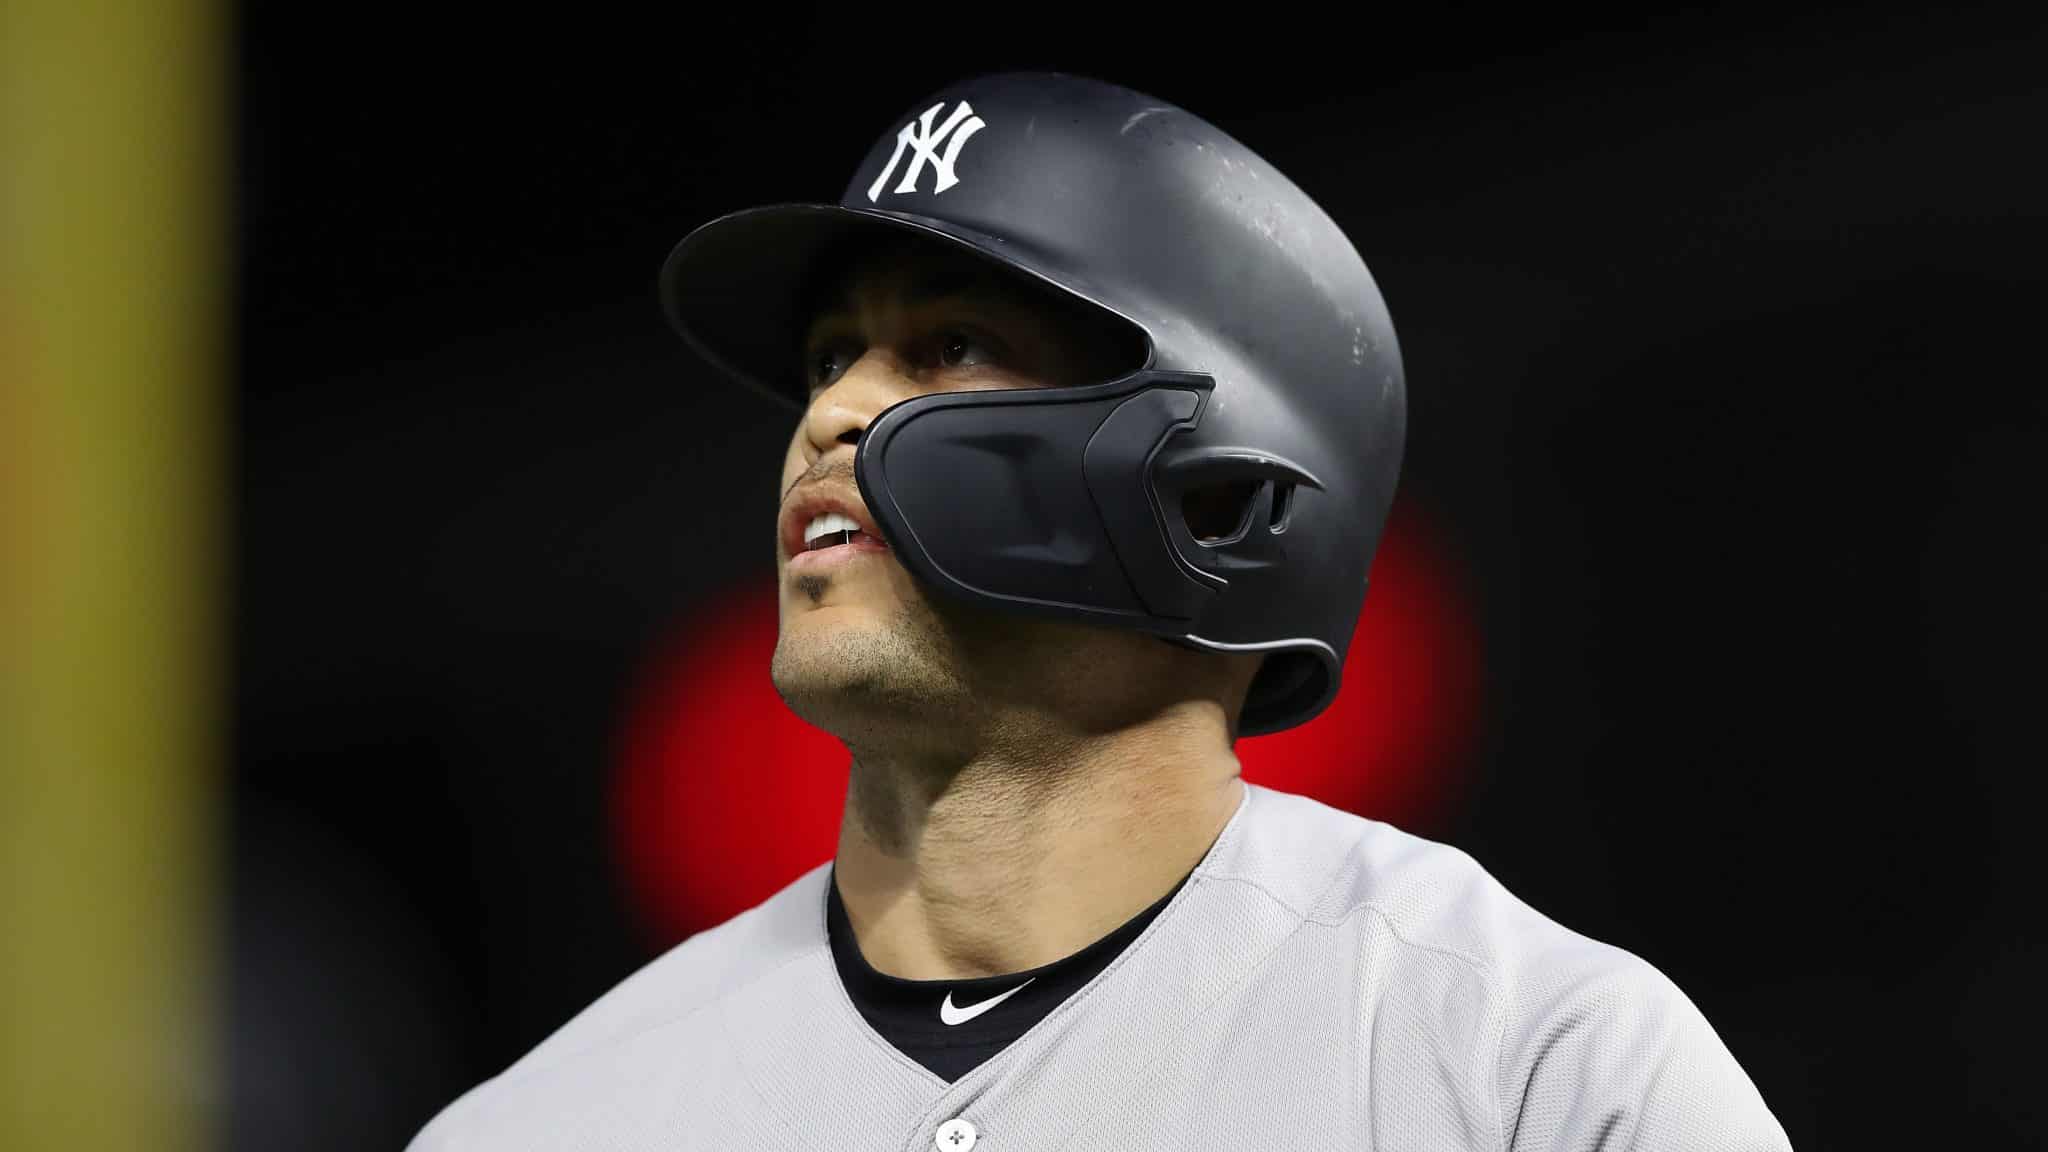 MINNEAPOLIS, MINNESOTA - OCTOBER 07: Giancarlo Stanton #27 of the New York Yankees reacts after striking out against the Minnesota Twins in the second inning of game three of the American League Division Series at Target Field on October 07, 2019 in Minneapolis, Minnesota.